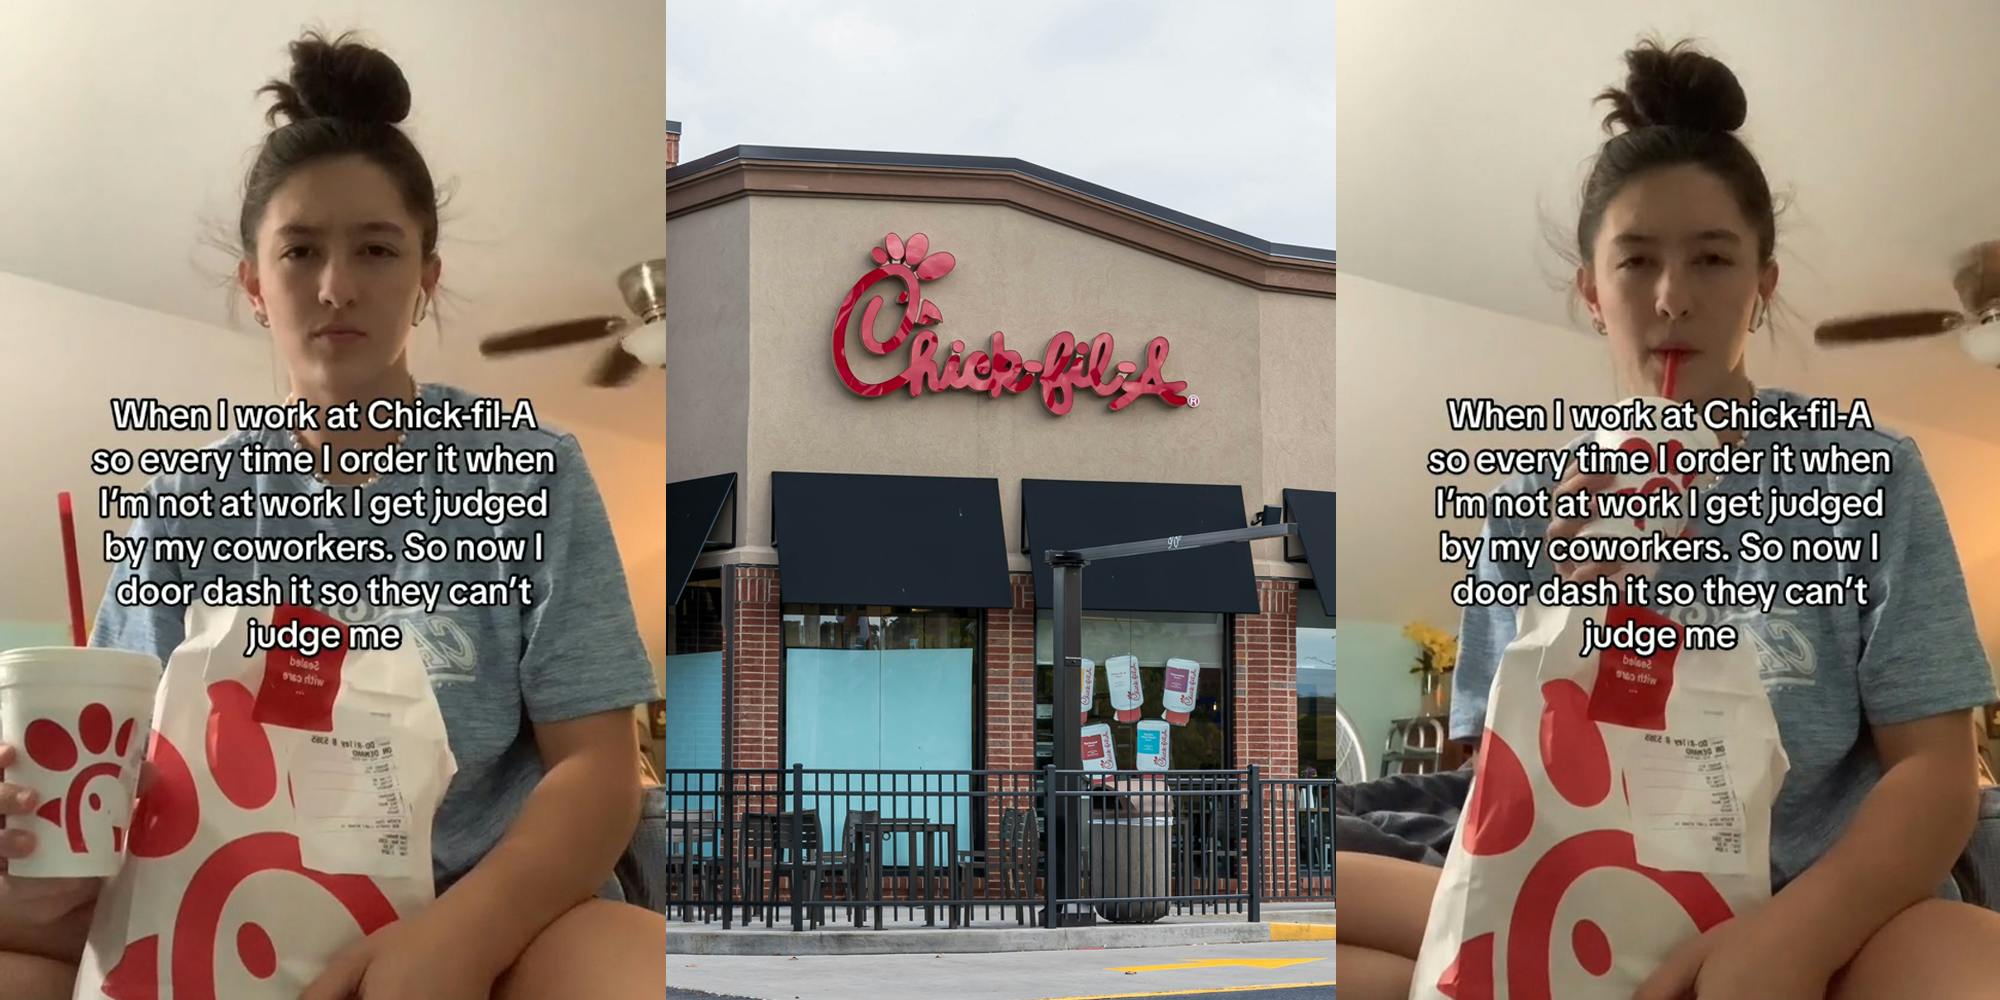 Chick-fil-A worker with food with caption "When I work at Chick-fil-A so every time I order it when I'm not at work I get judged by my coworkers. So now I door dash it so they can't judge me" (l) Chick-fil-A building with sign (c) Chick-Fil-A worker with food with caption "When I work at Chick-fil-A so every time I order it when I'm not at work I get judged by my coworkers. So now I door dash it so they can't judge me" (r)